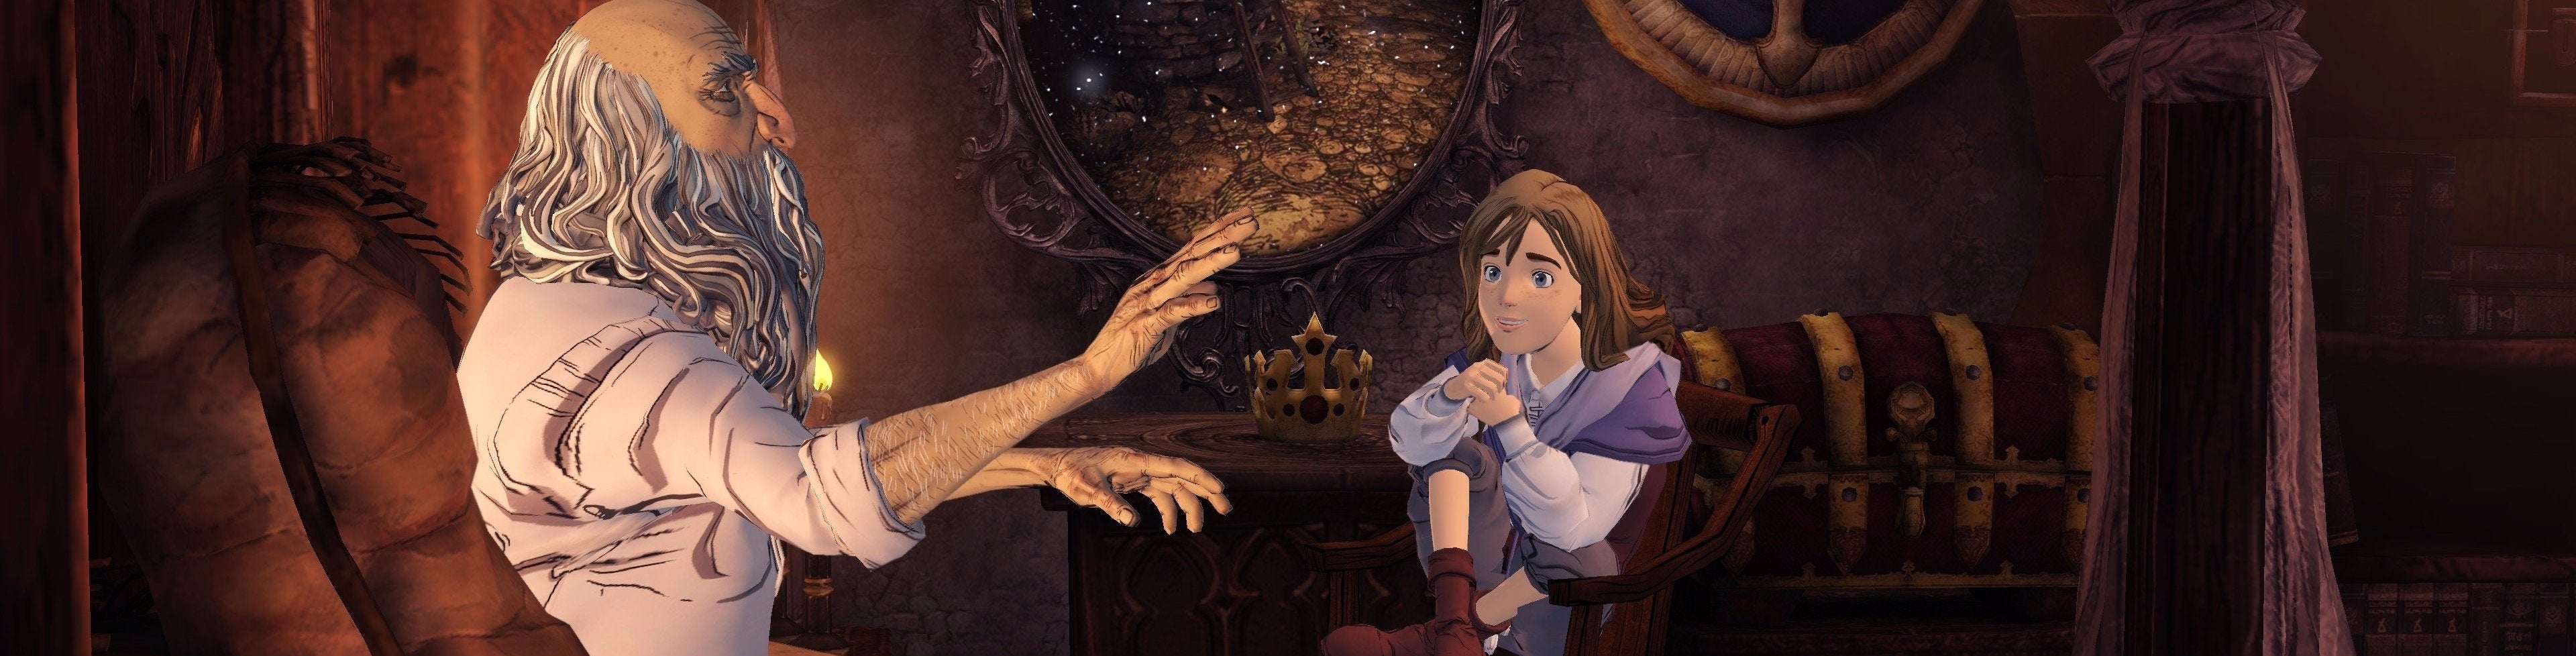 Image for King's Quest charms and delights in its episodic revival